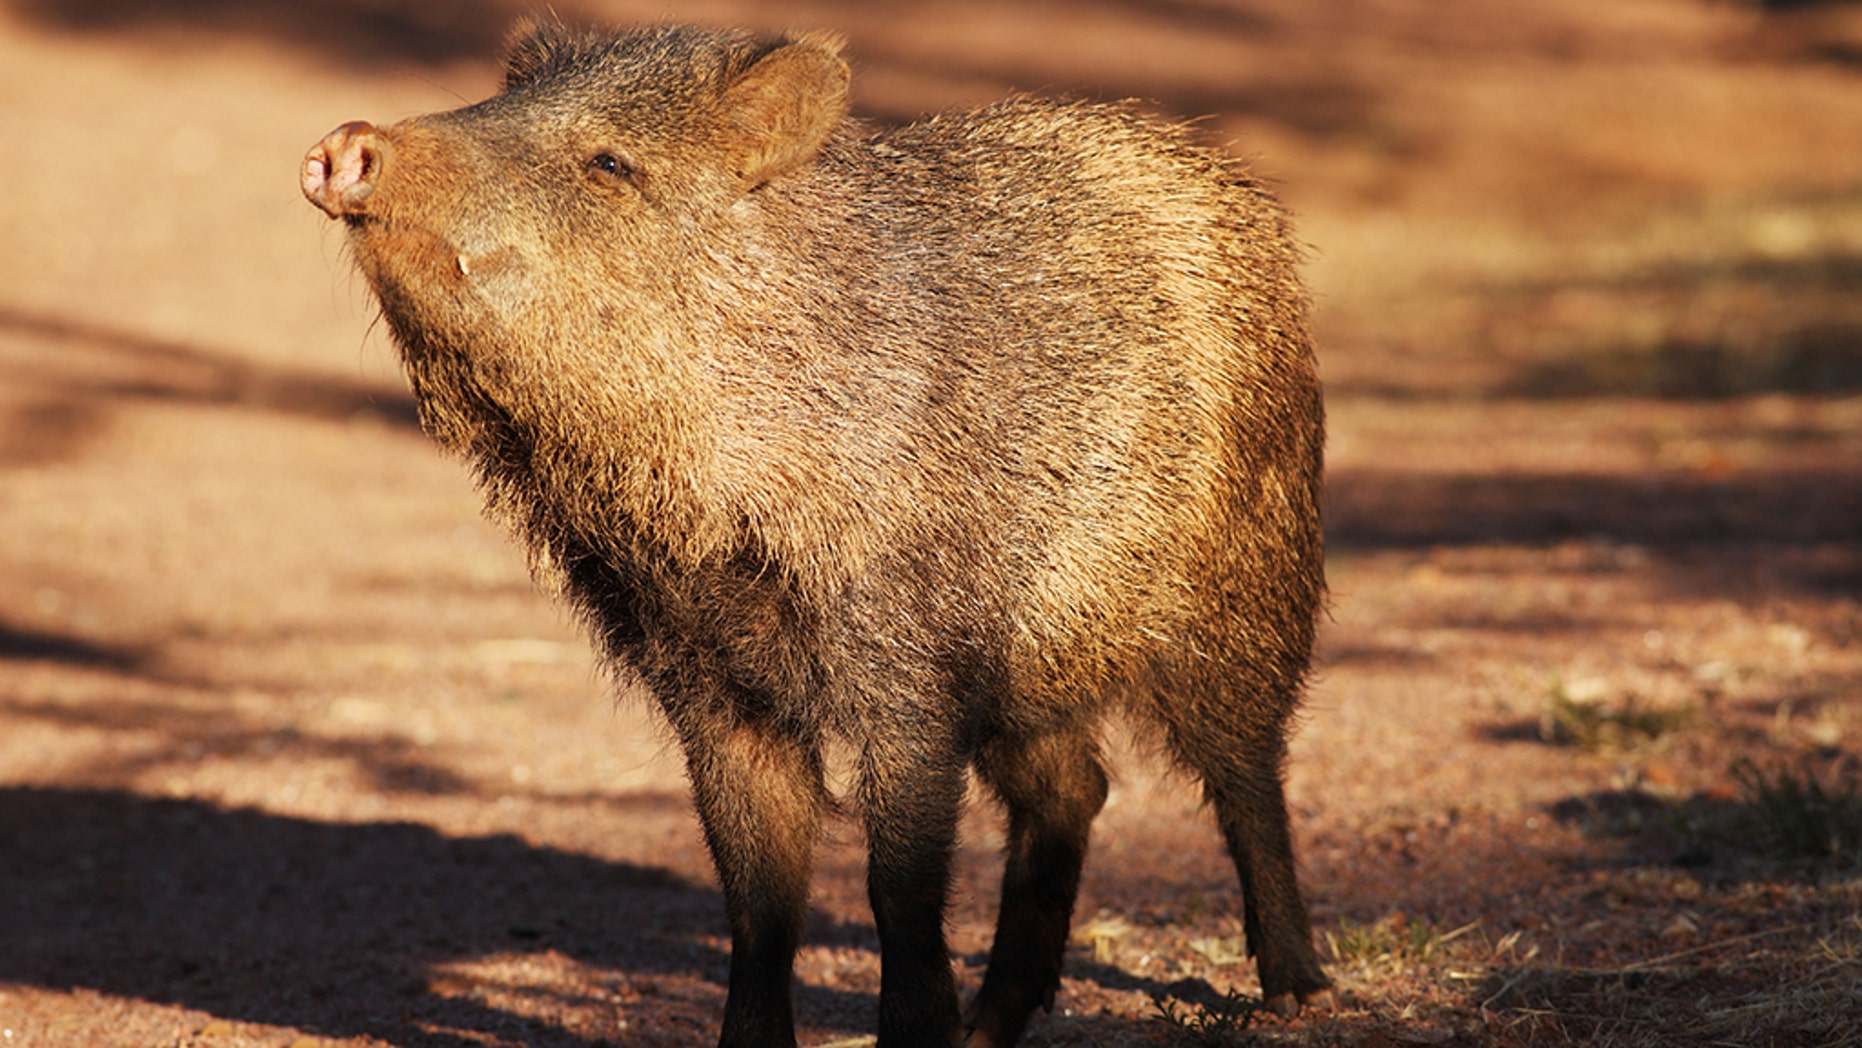 A modern-day peccary.